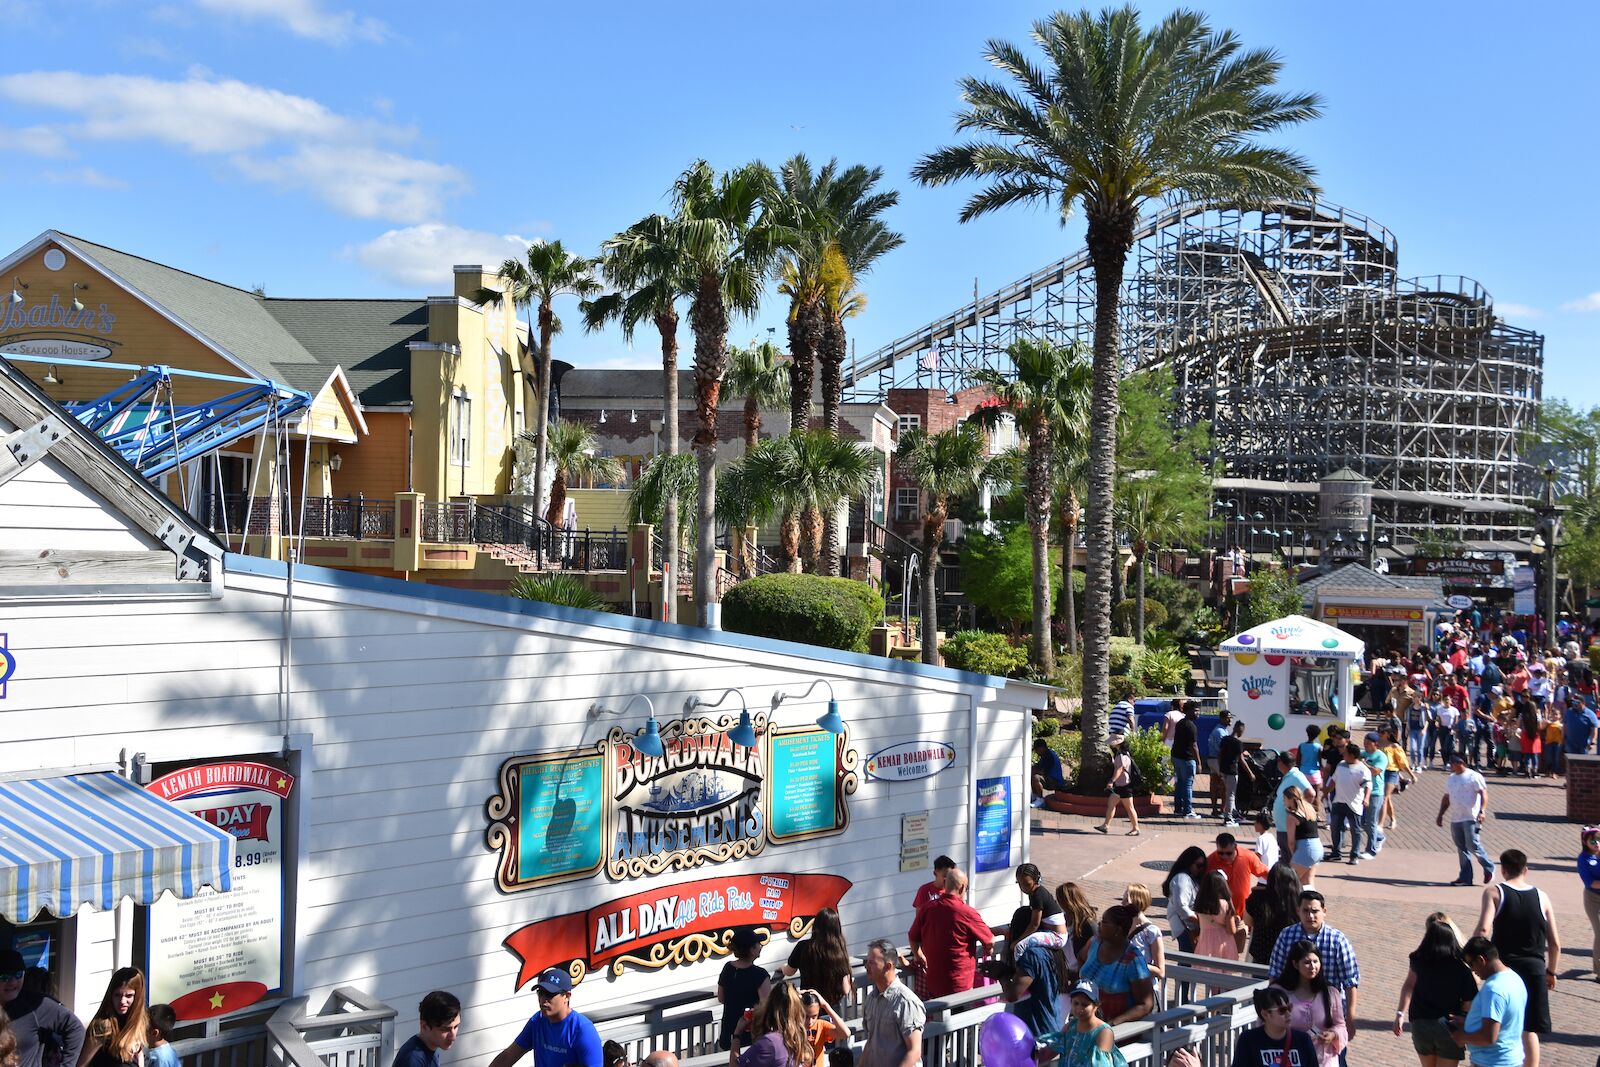 KEMAH, TX â€“ APR 21: Rides at Kemah Boardwalk, in Kemah, near Houston, Texas, on Apr 21, 2019. It is a 60-acre Texas Gulf Coast theme park and considered one of the premier boardwalks in the US.